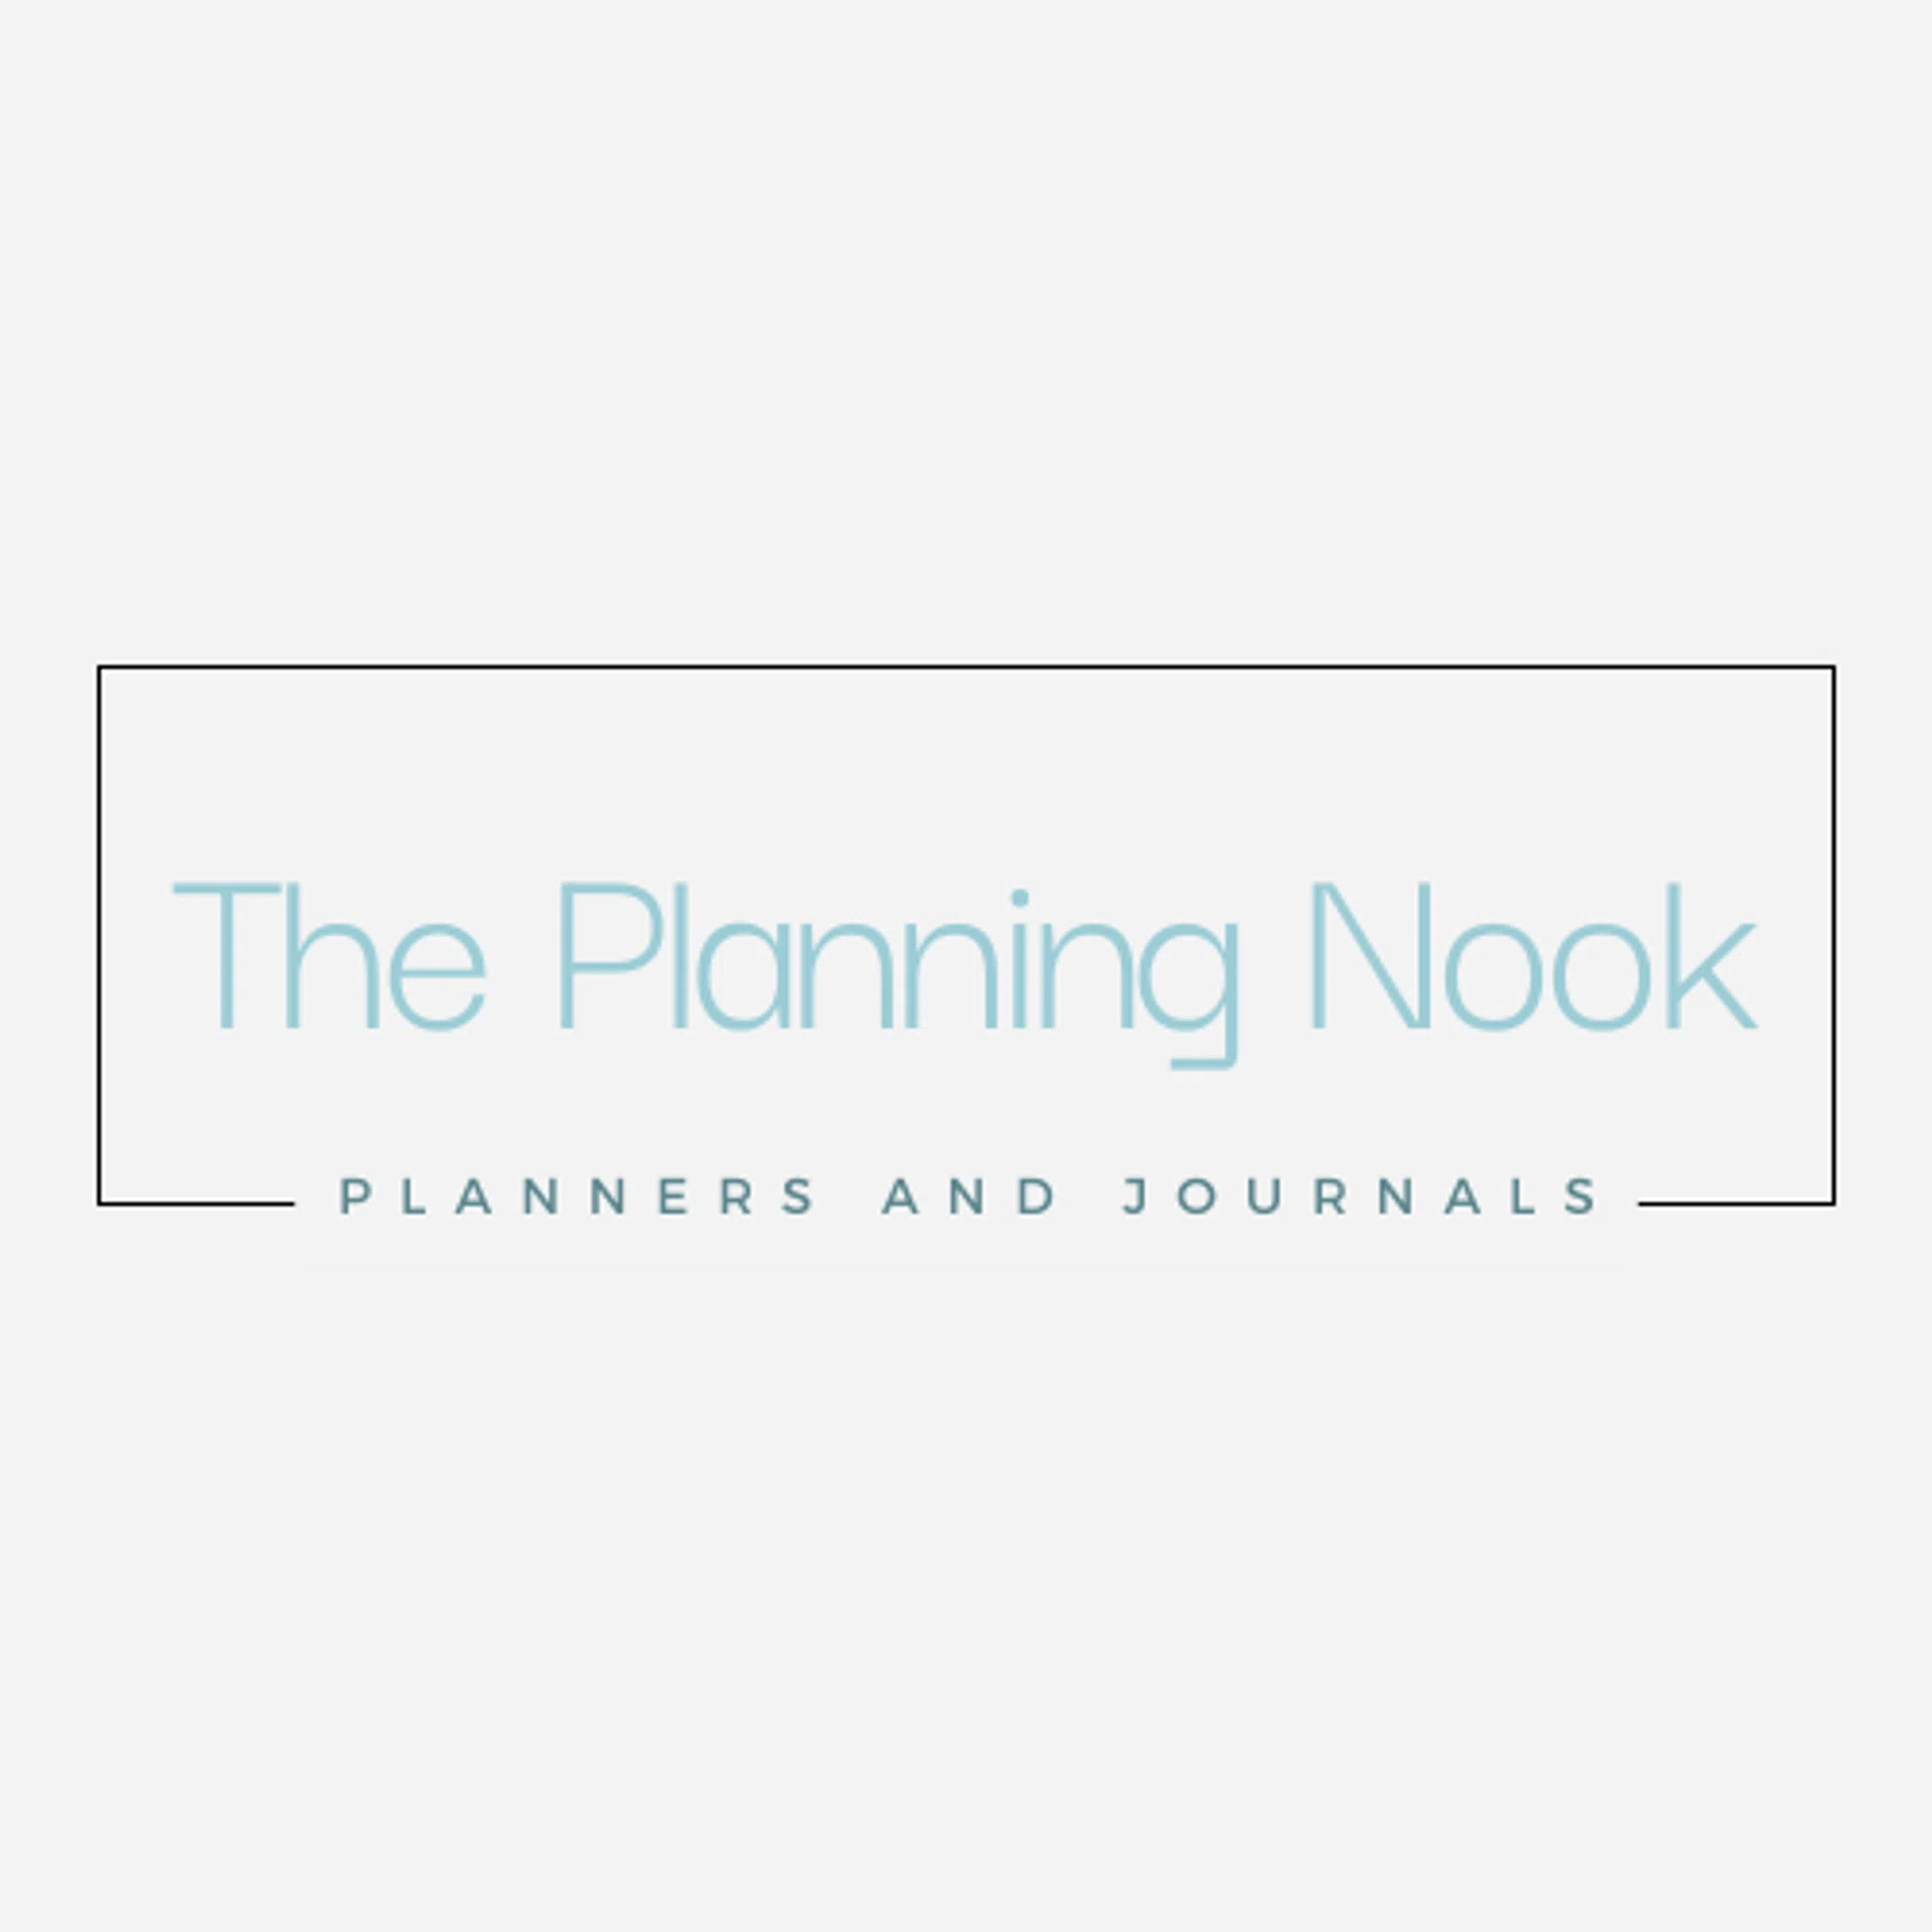 The Planning Nook